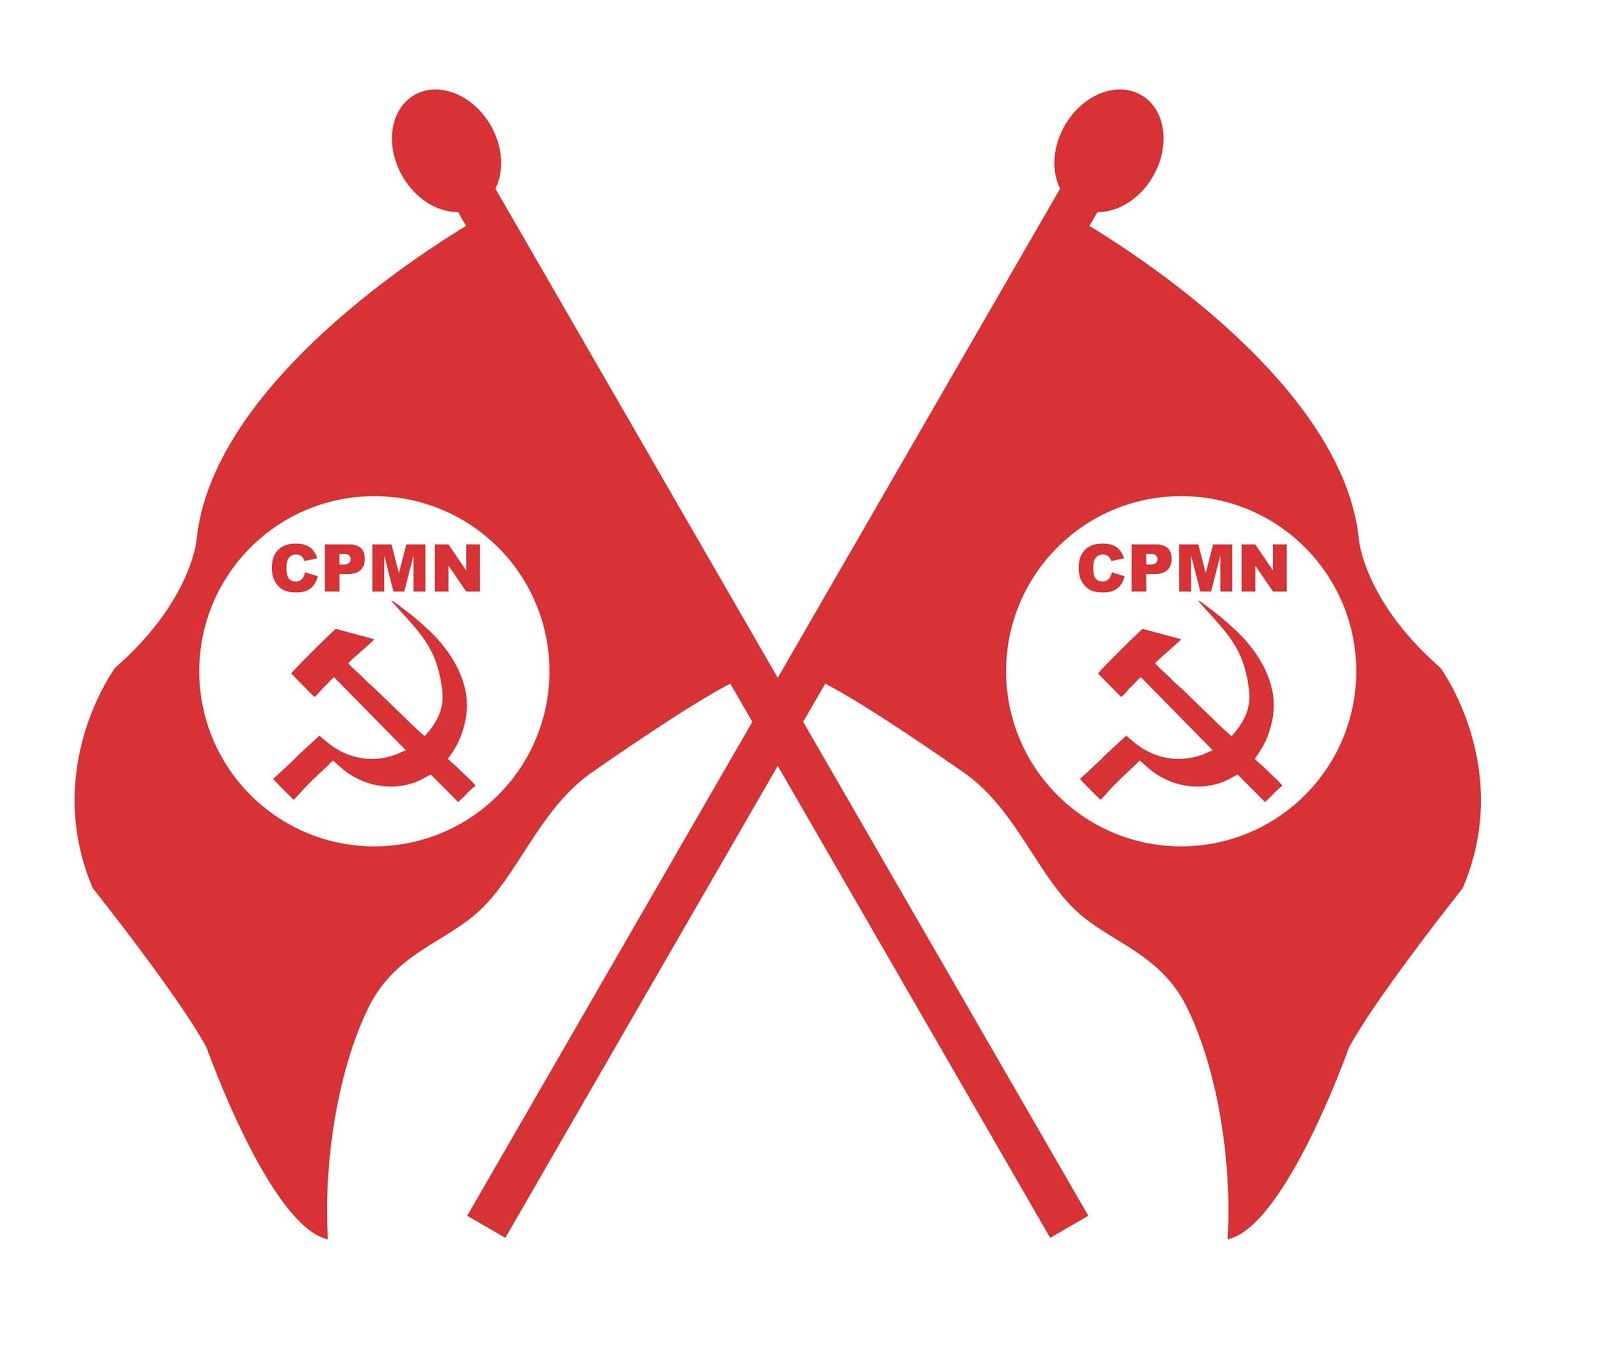 CPMN, Communist Party Of Marxist New